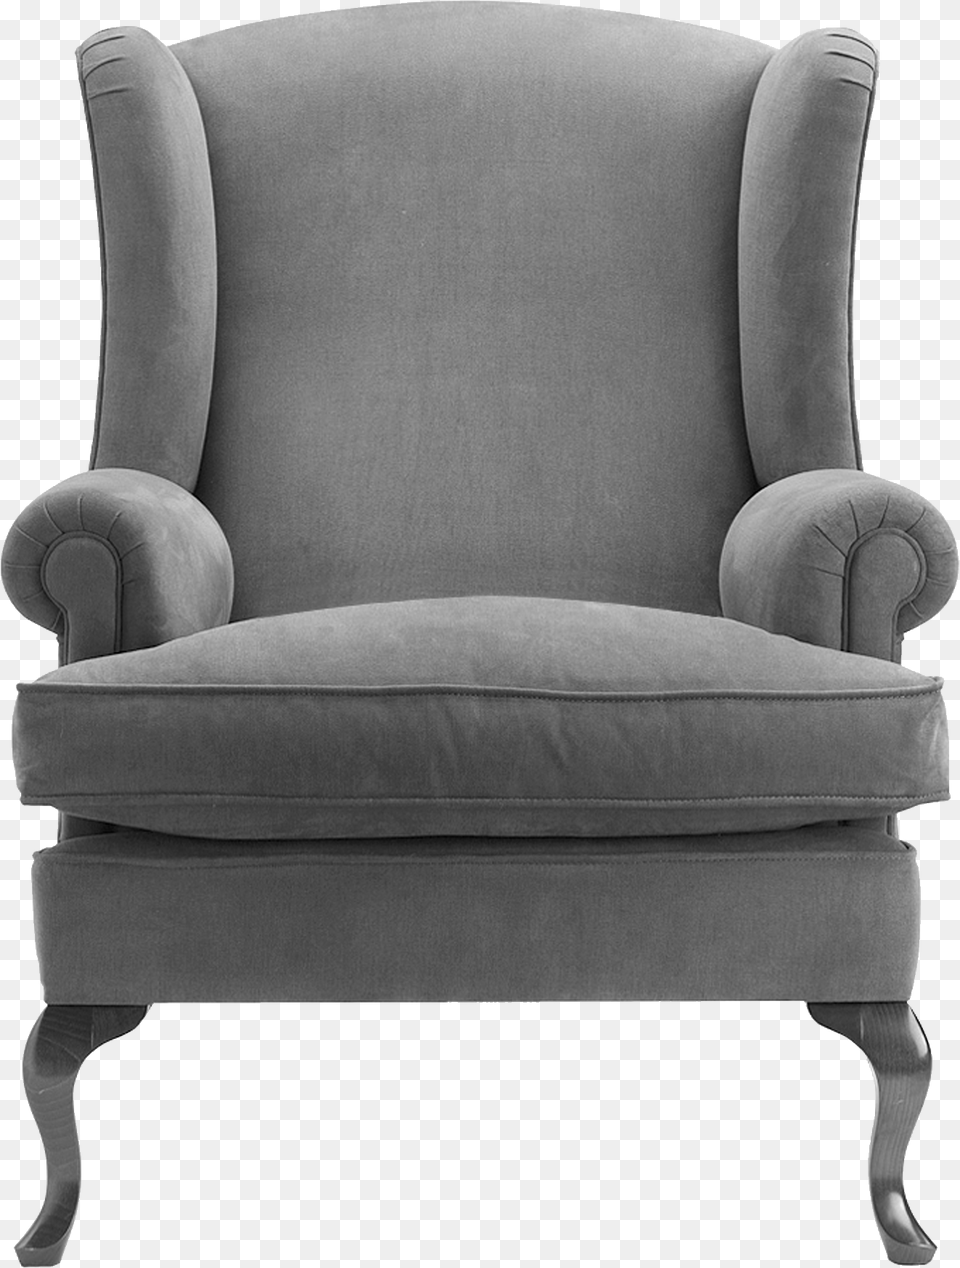 Untitled, Chair, Furniture, Armchair Png Image